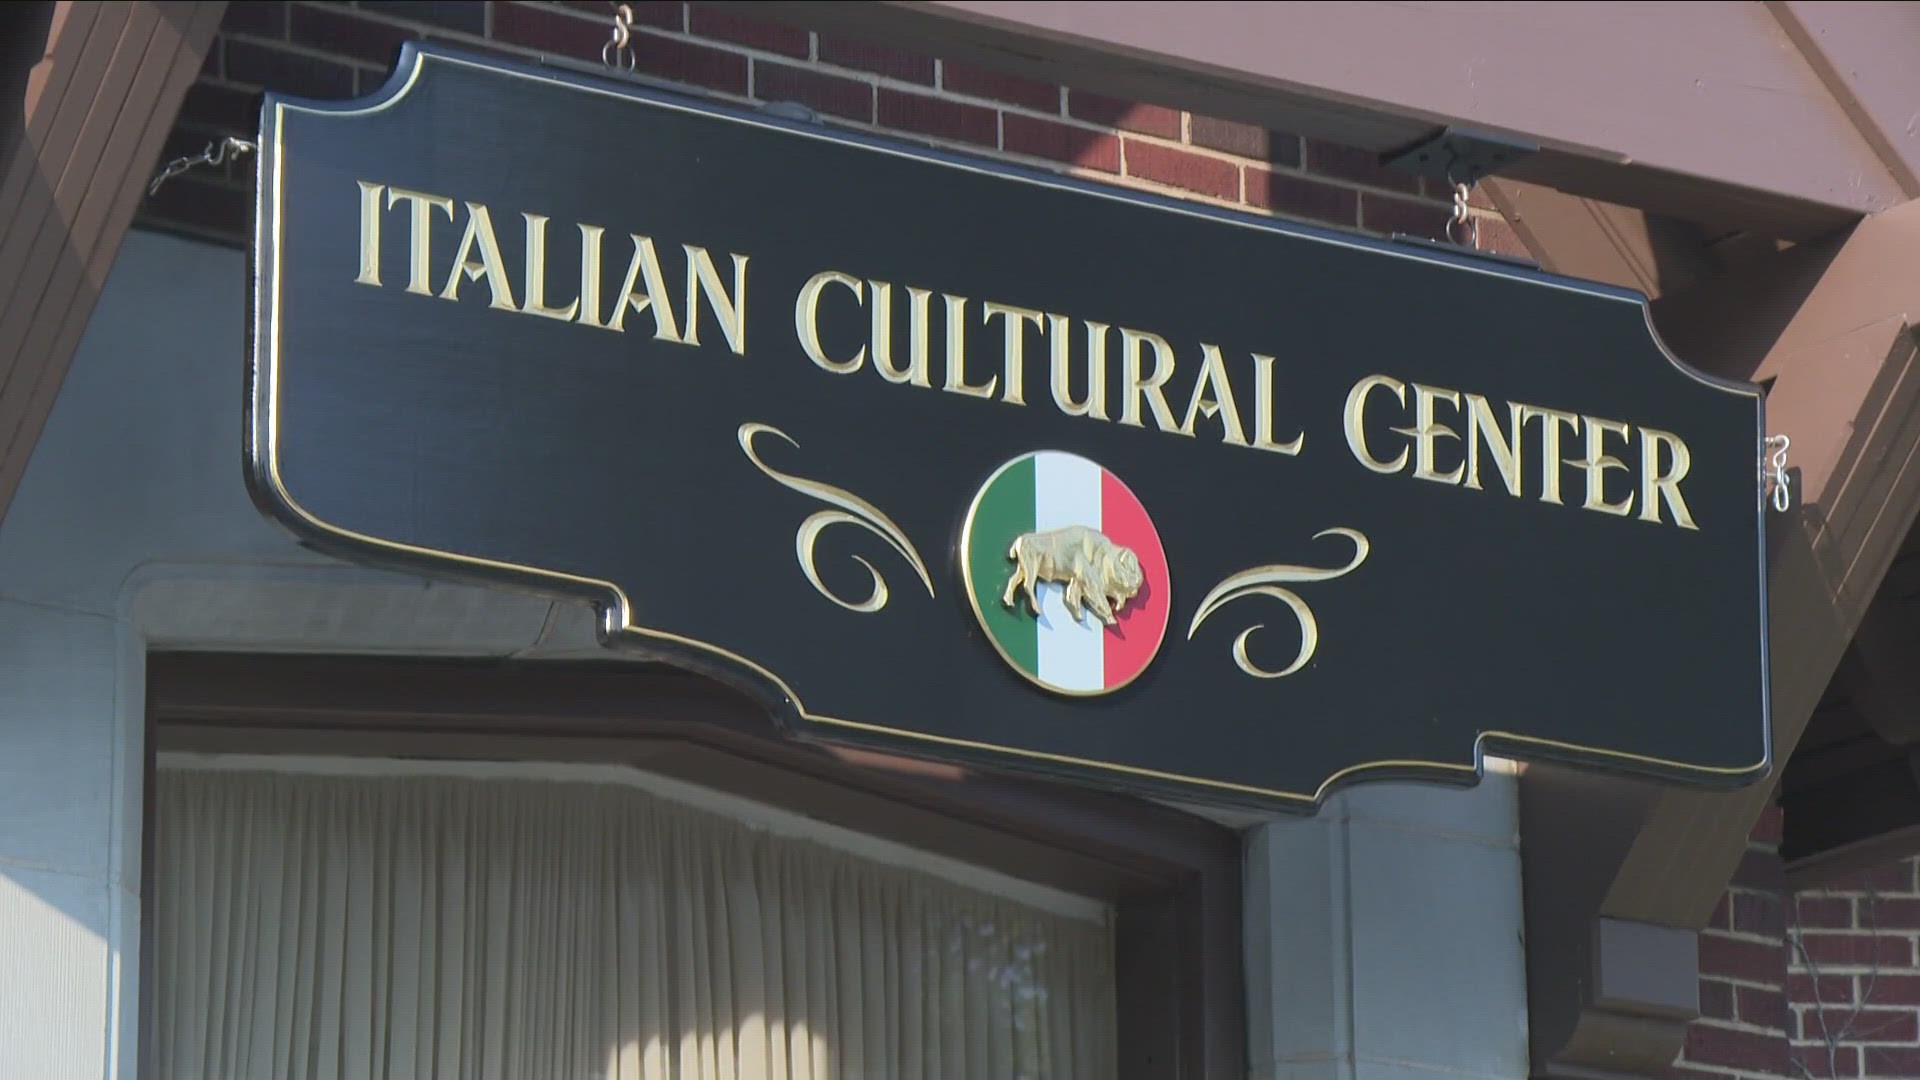 since 20-19 the italian cultural center has been awarded over 167-thousand dollars from the county....